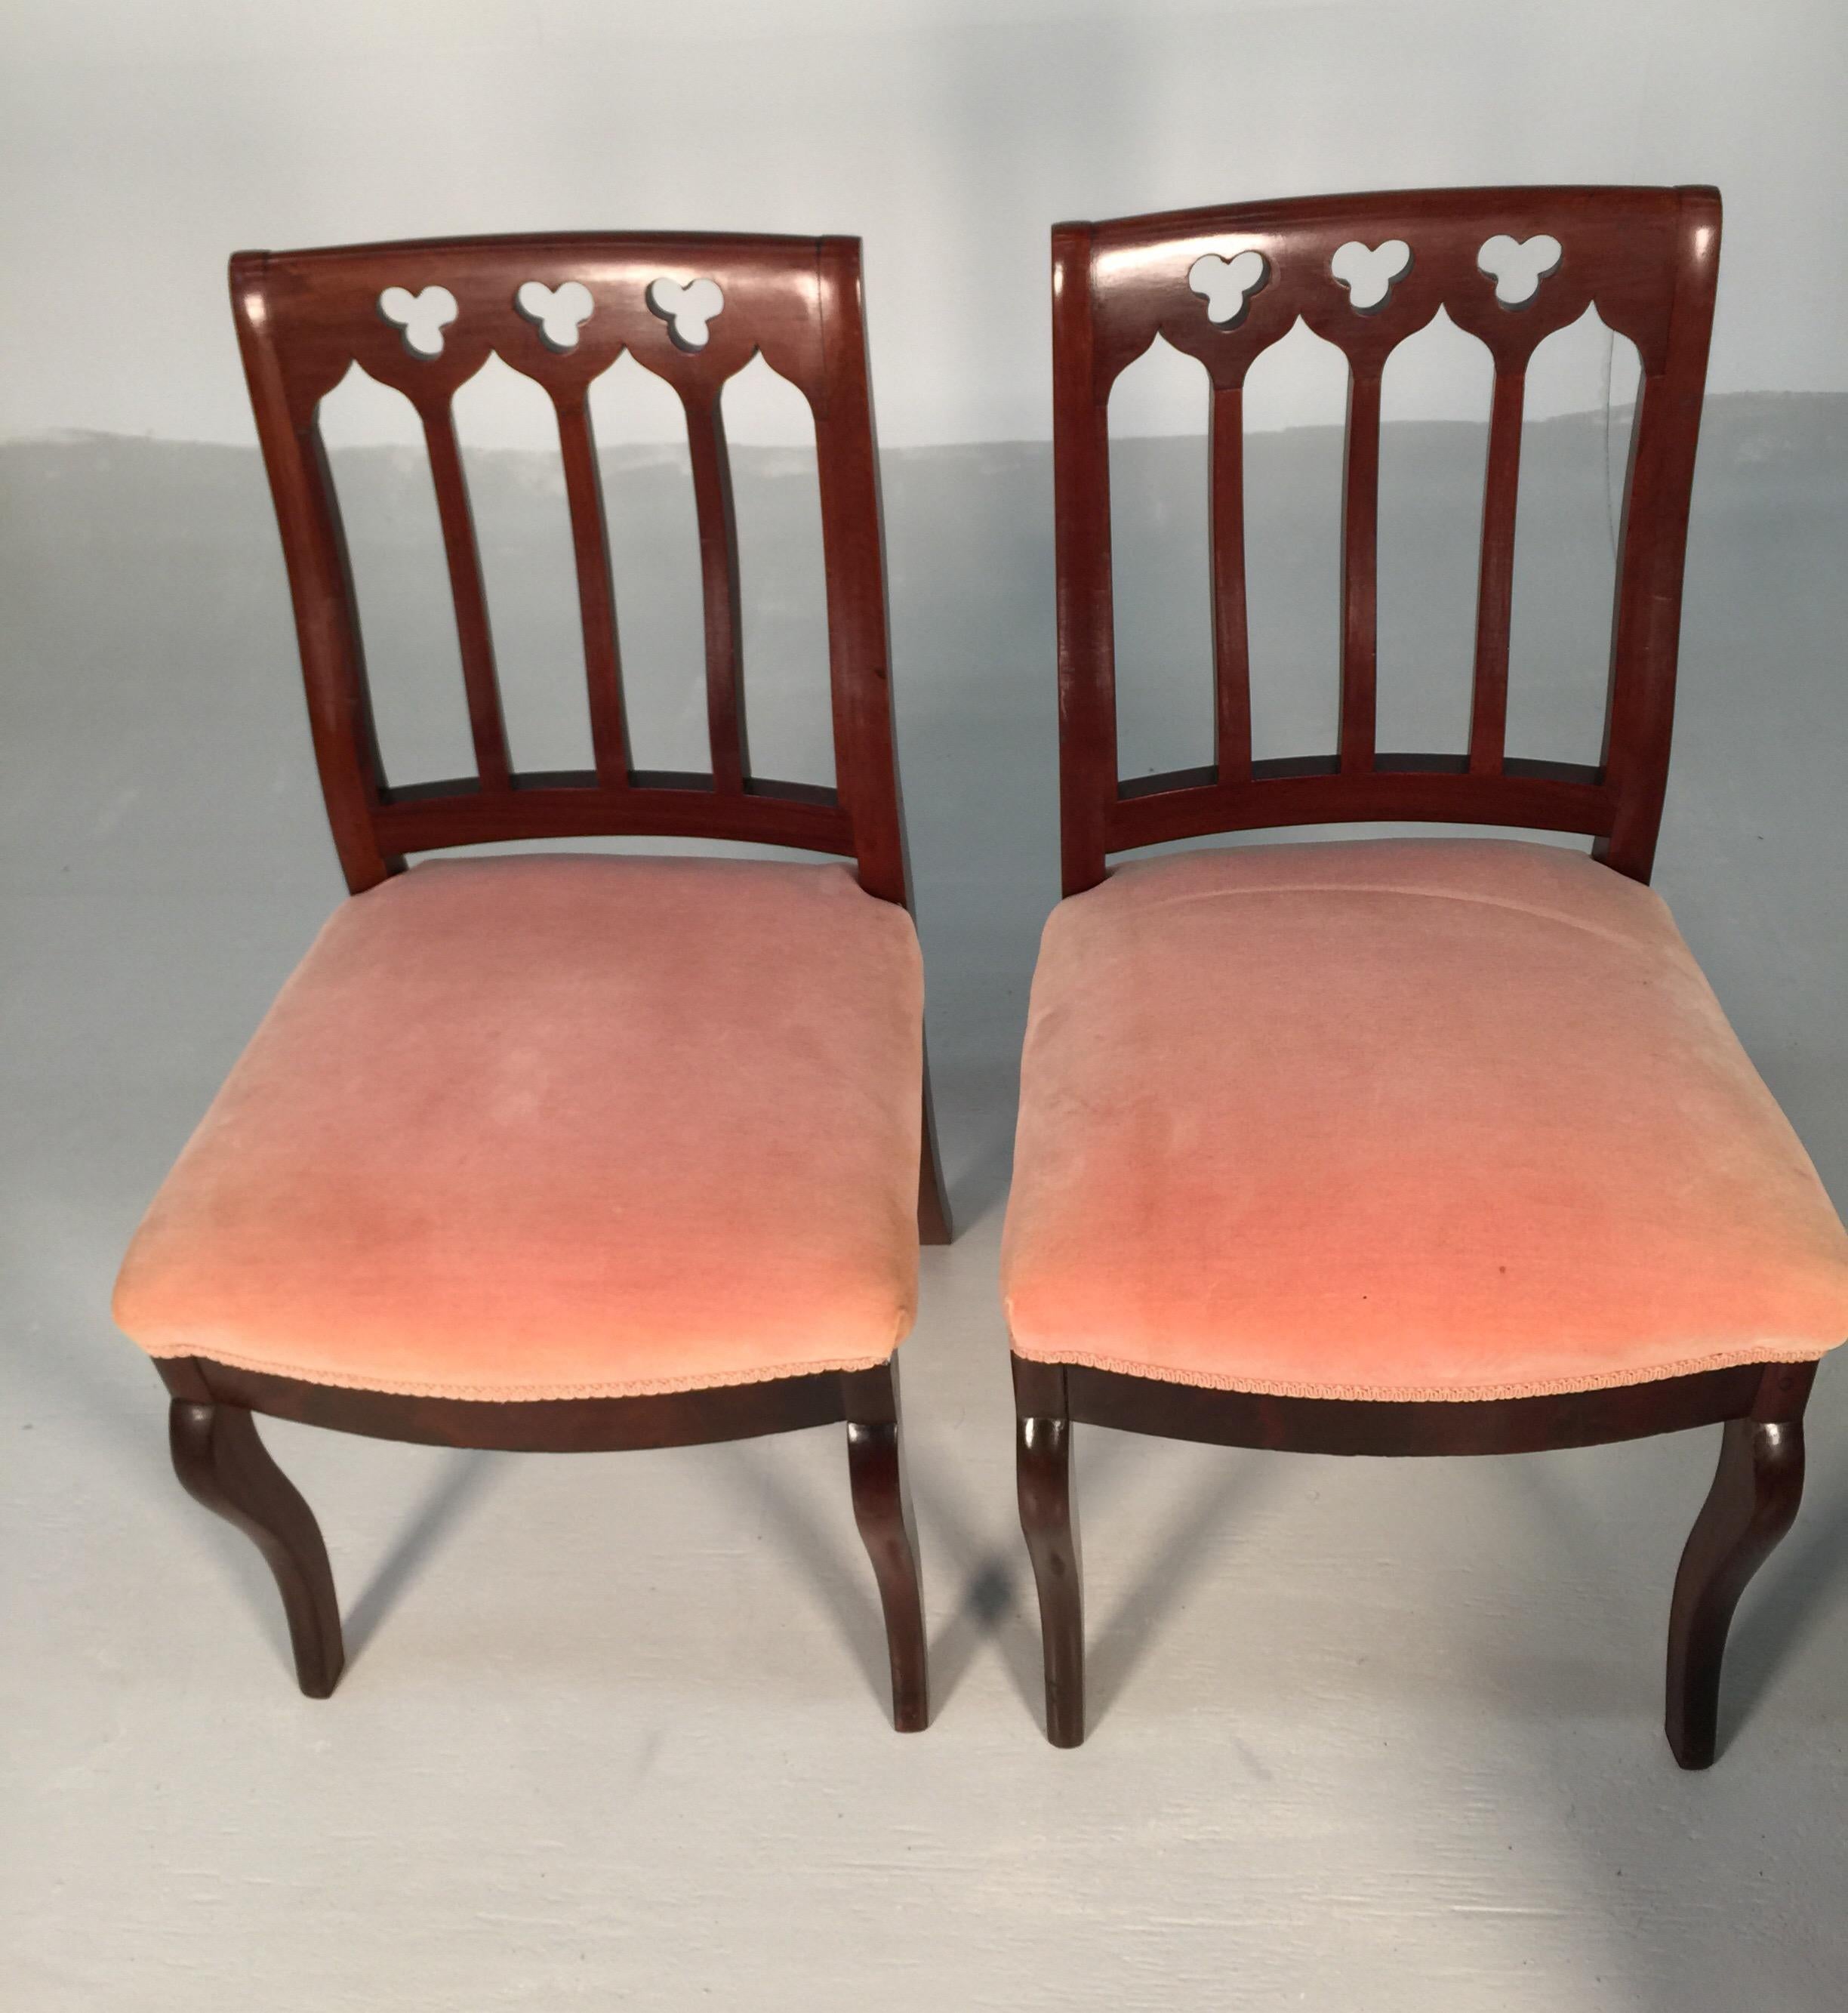 Mid-19th Century Set of 10, circa 1850s Gothic Revival Upholstered Dining Chairs, by John Jelliff